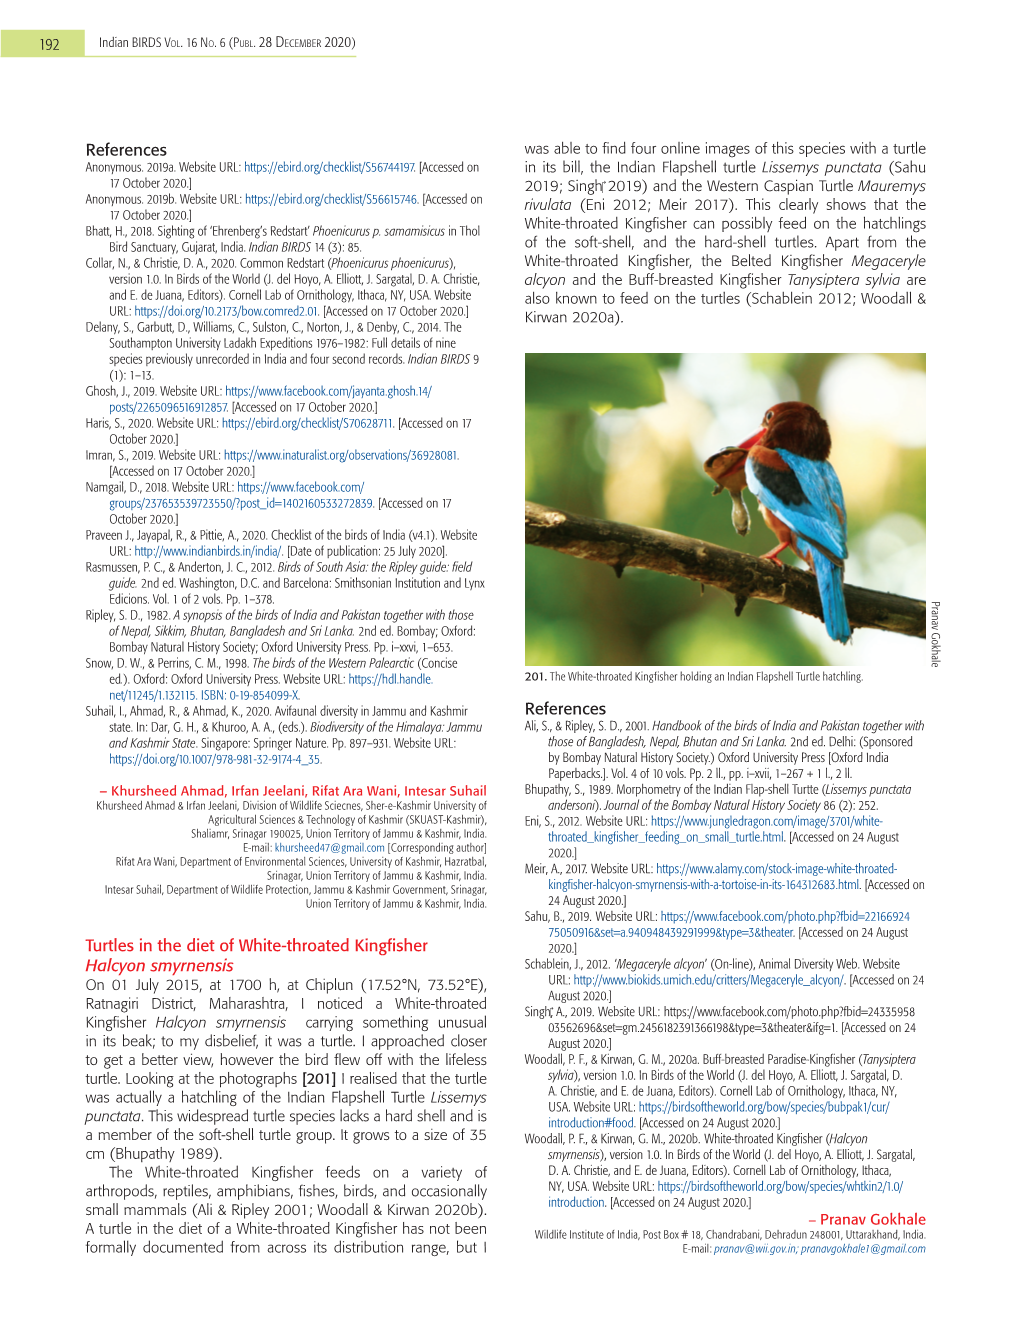 Turtles in the Diet of White-Throated Kingfisher Halcyon Smyrnensis